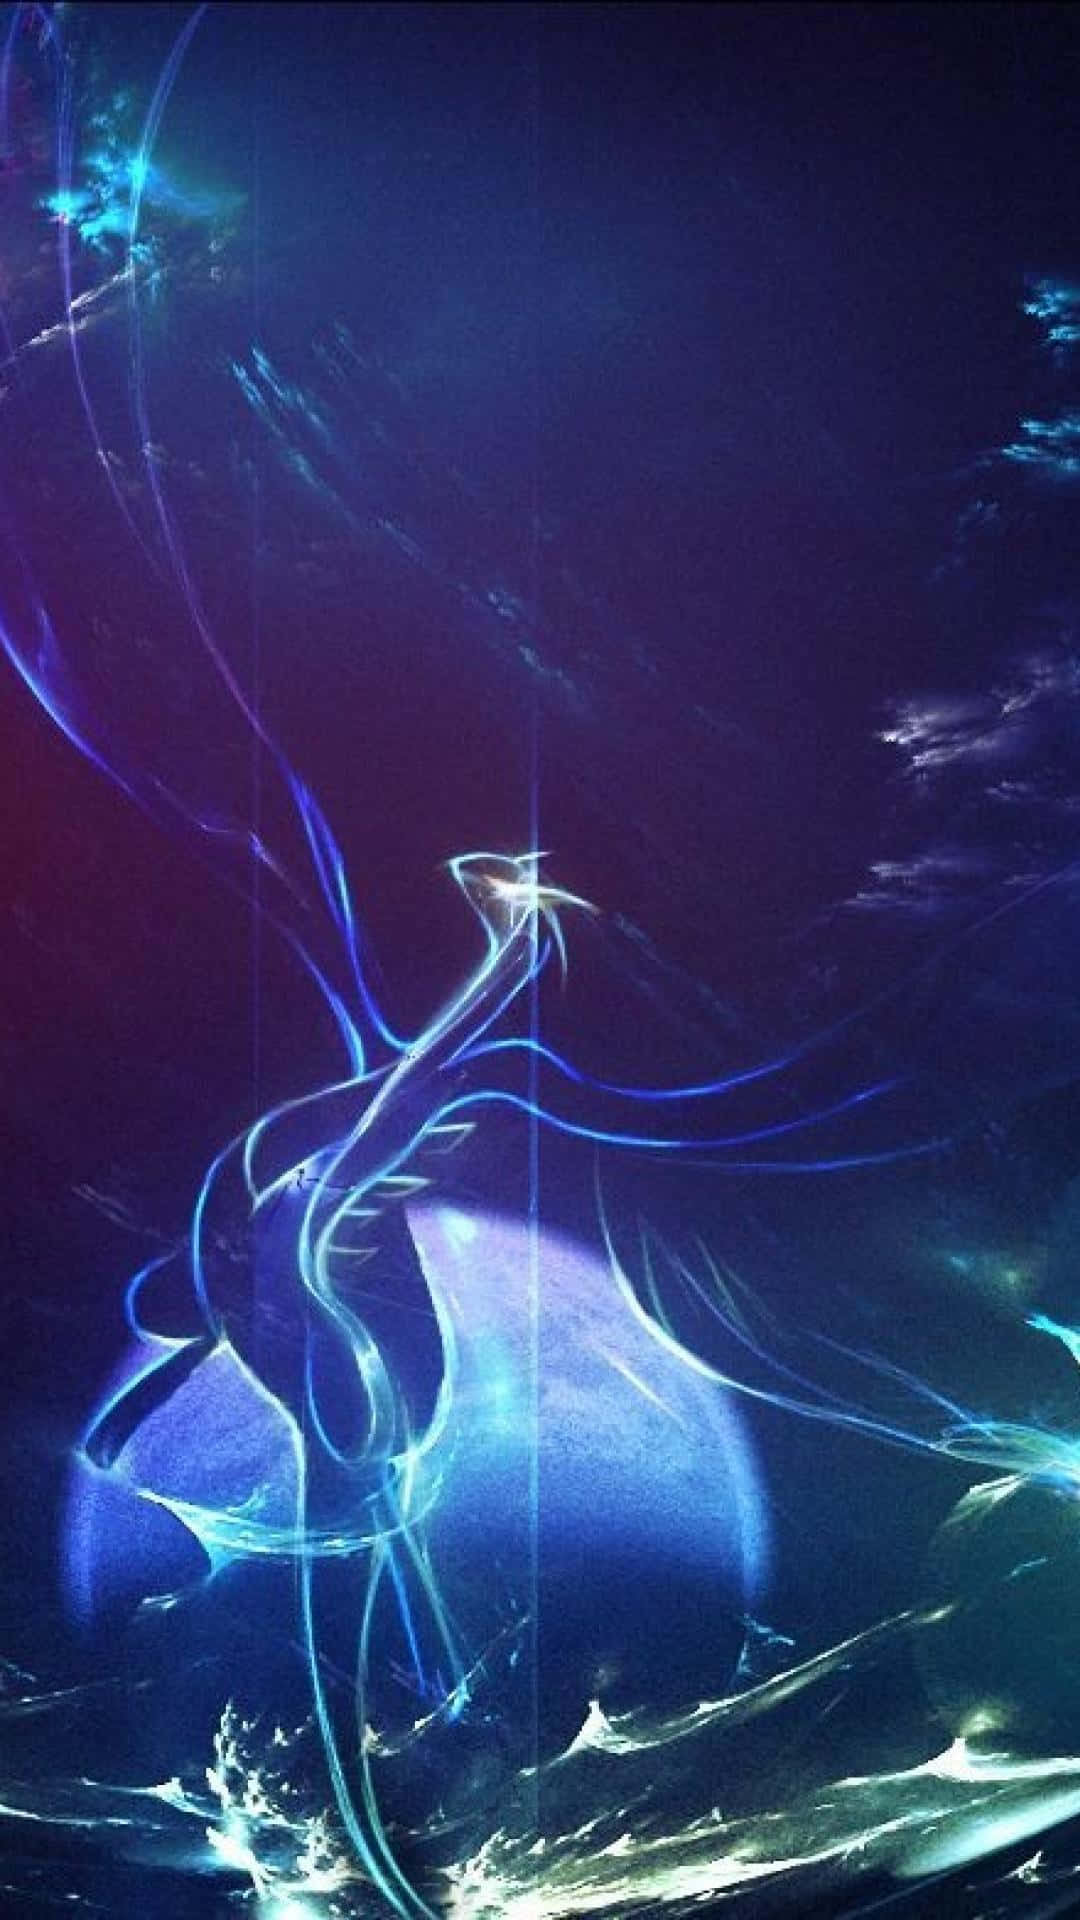 Close up of the Pokémon lugia focusing on the feet in a blue sky background